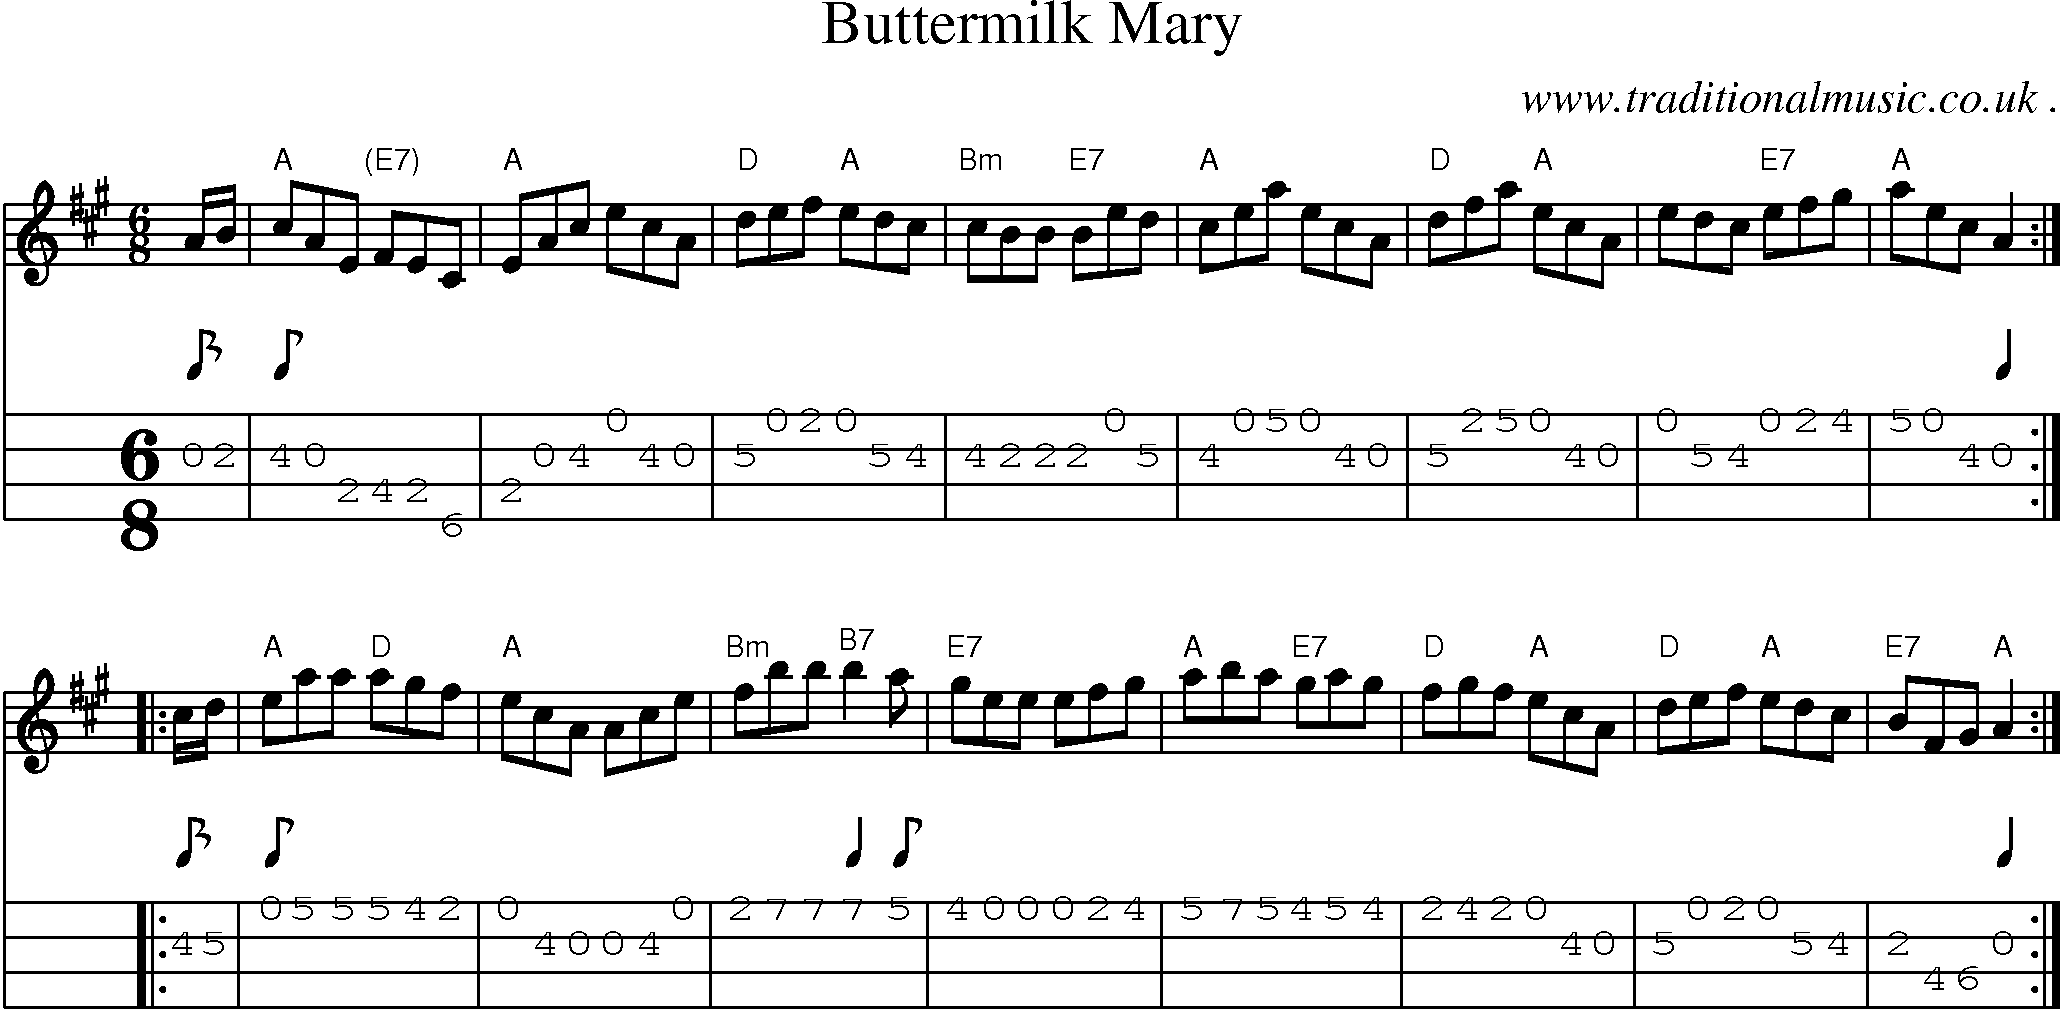 Sheet-music  score, Chords and Mandolin Tabs for Buttermilk Mary